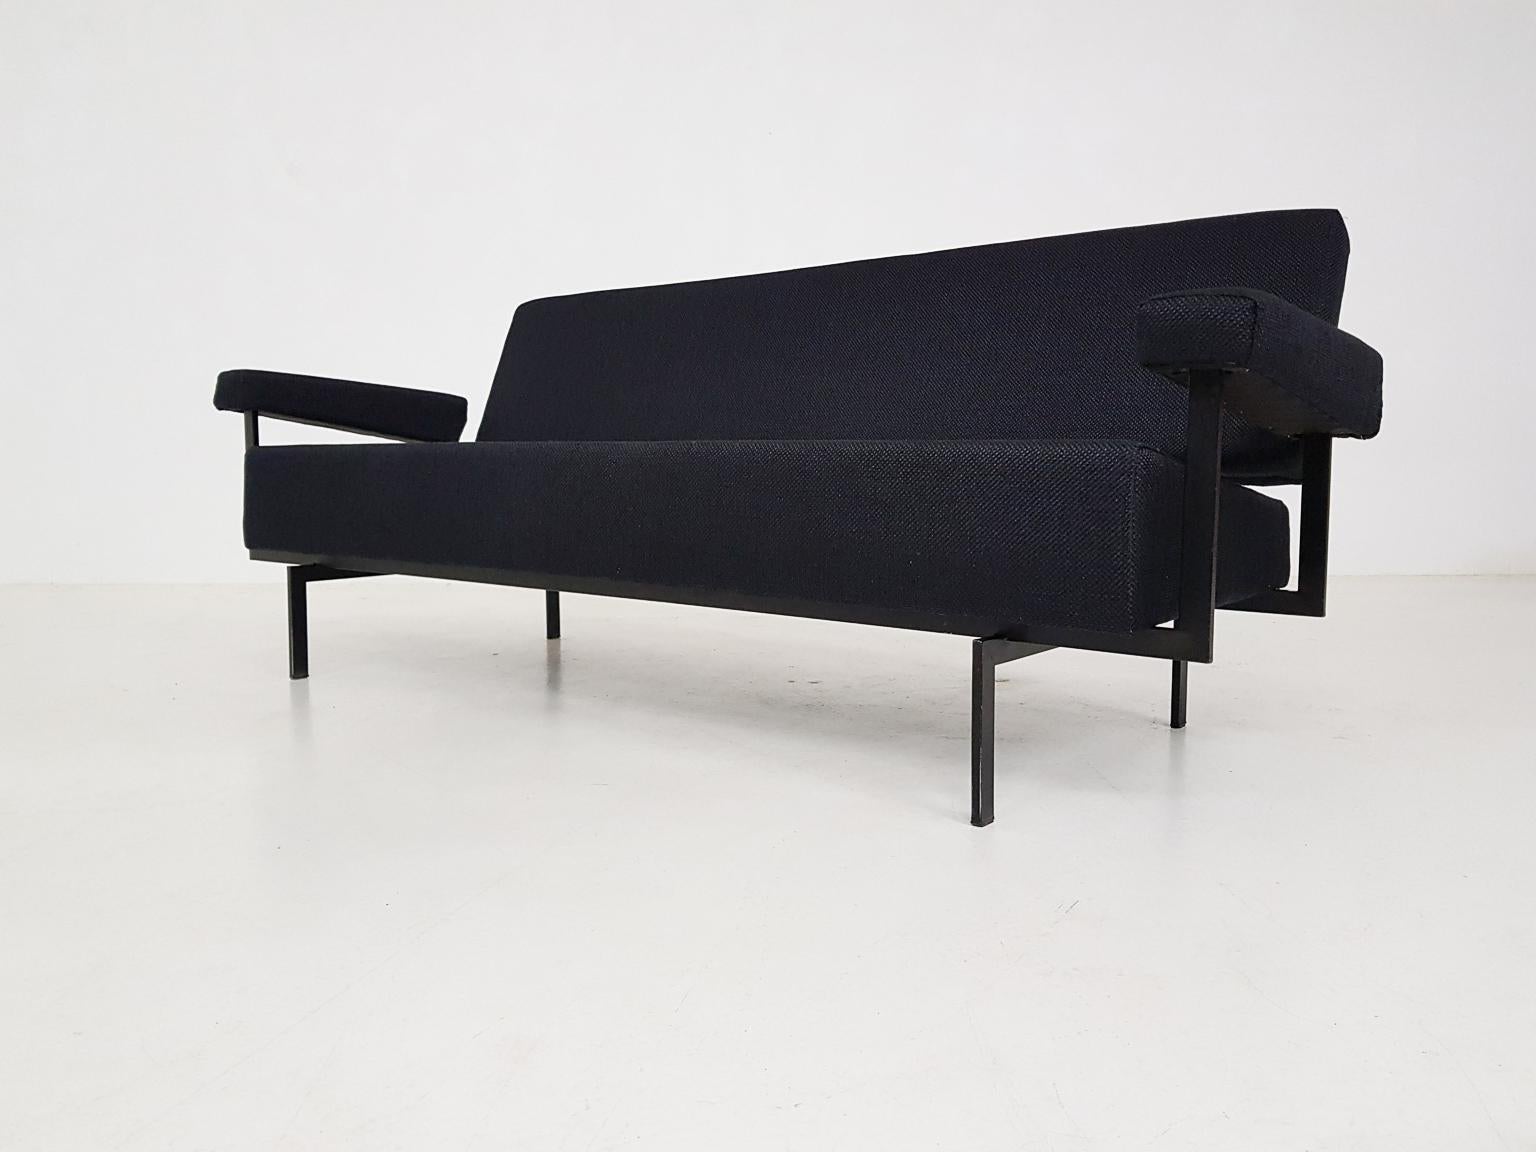 Mid-20th Century Japanese Series MM07 Sofa by Cees Braakman for Pastoe, Dutch Modern Design, 1958